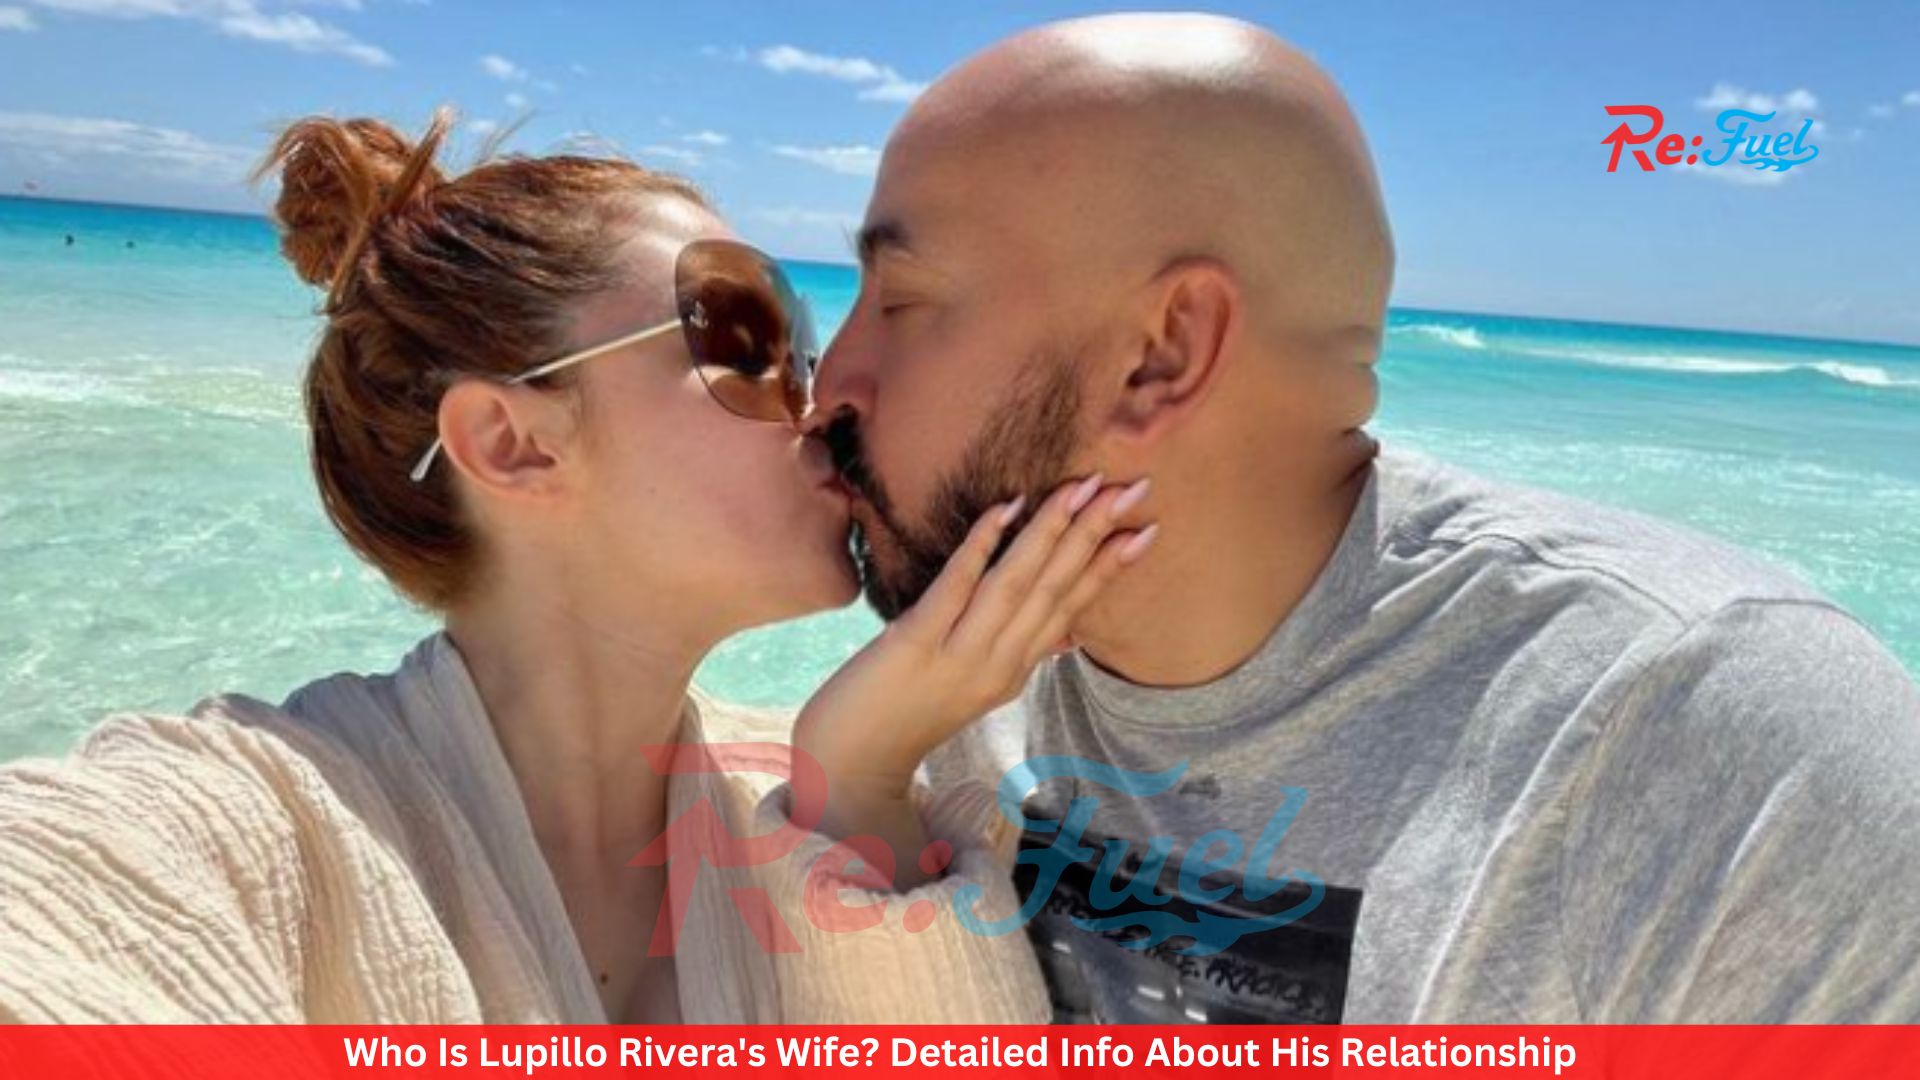 Who Is Lupillo Rivera's Wife? Detailed Info About His Relationship